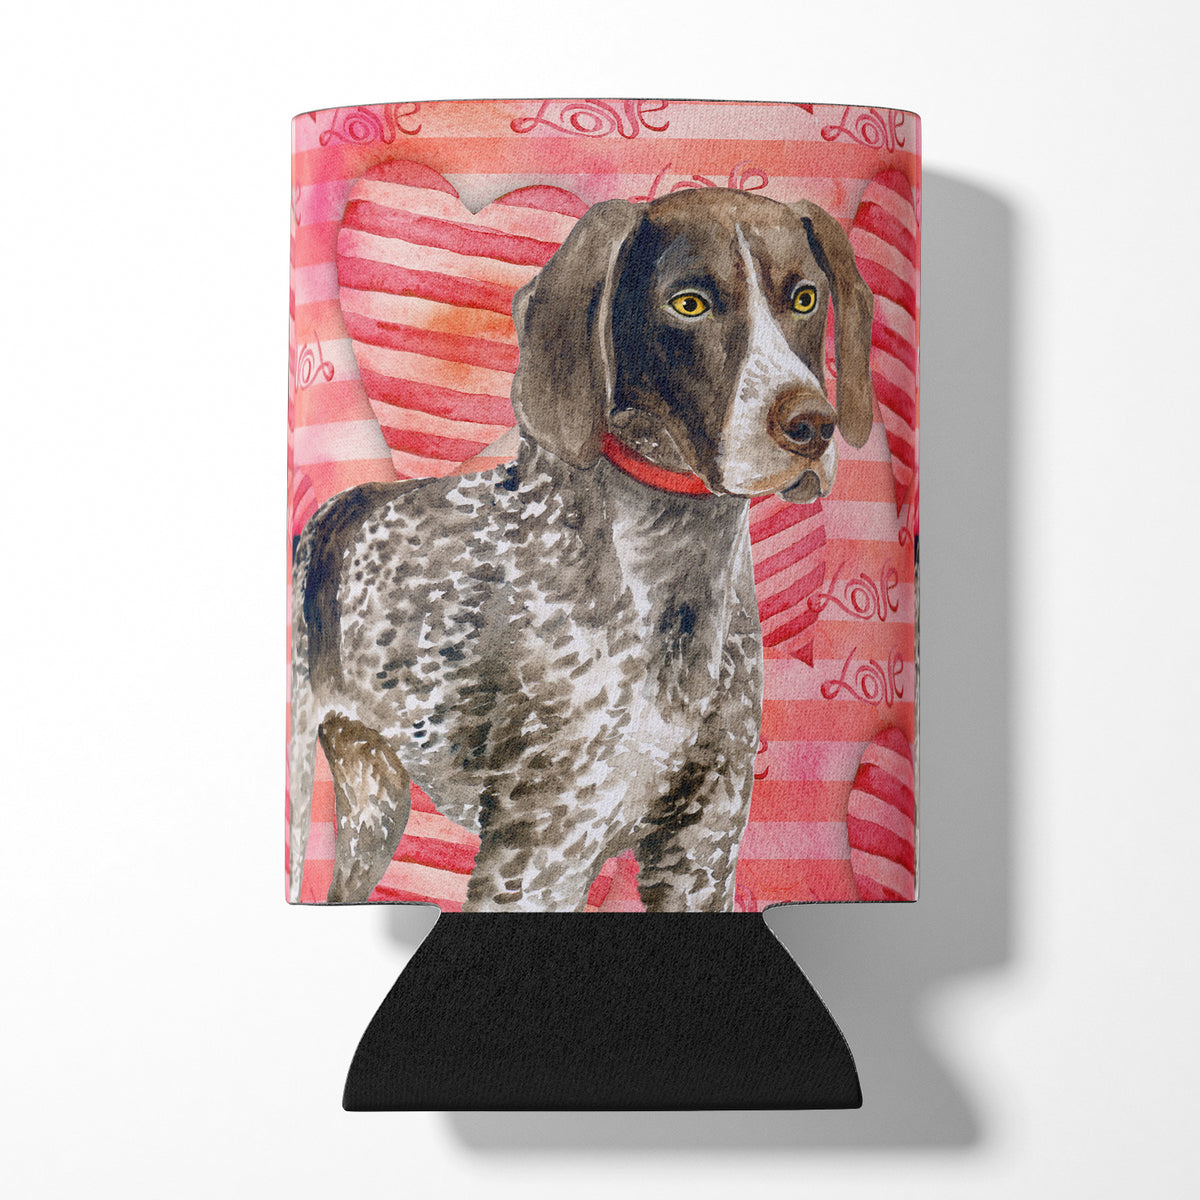 German Shorthaired Pointer Love Can or Bottle Hugger BB9728CC  the-store.com.